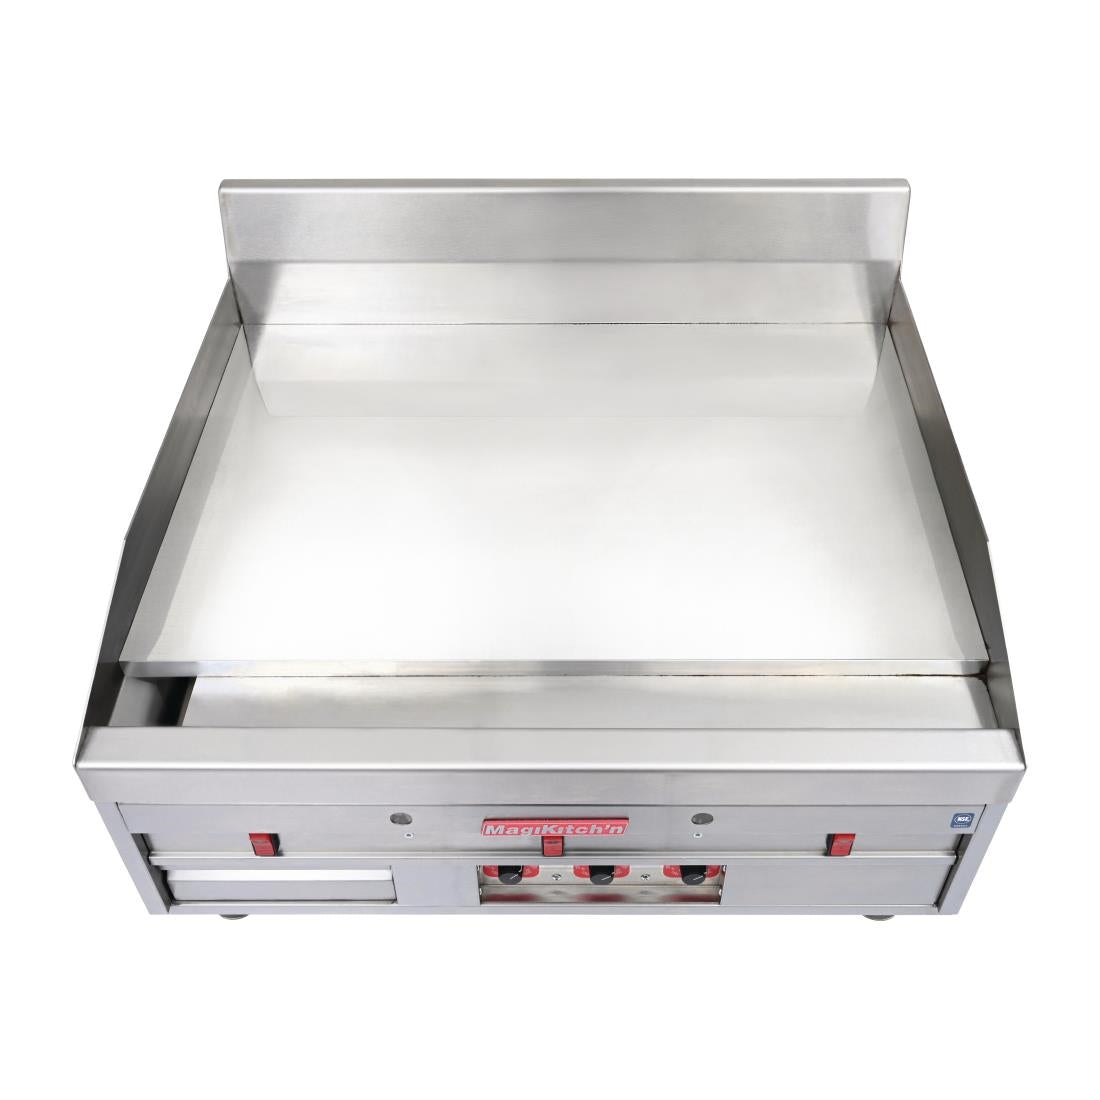 FP882 MagiKitch'n Heavy Duty Chrome Griddle MKG24 JD Catering Equipment Solutions Ltd